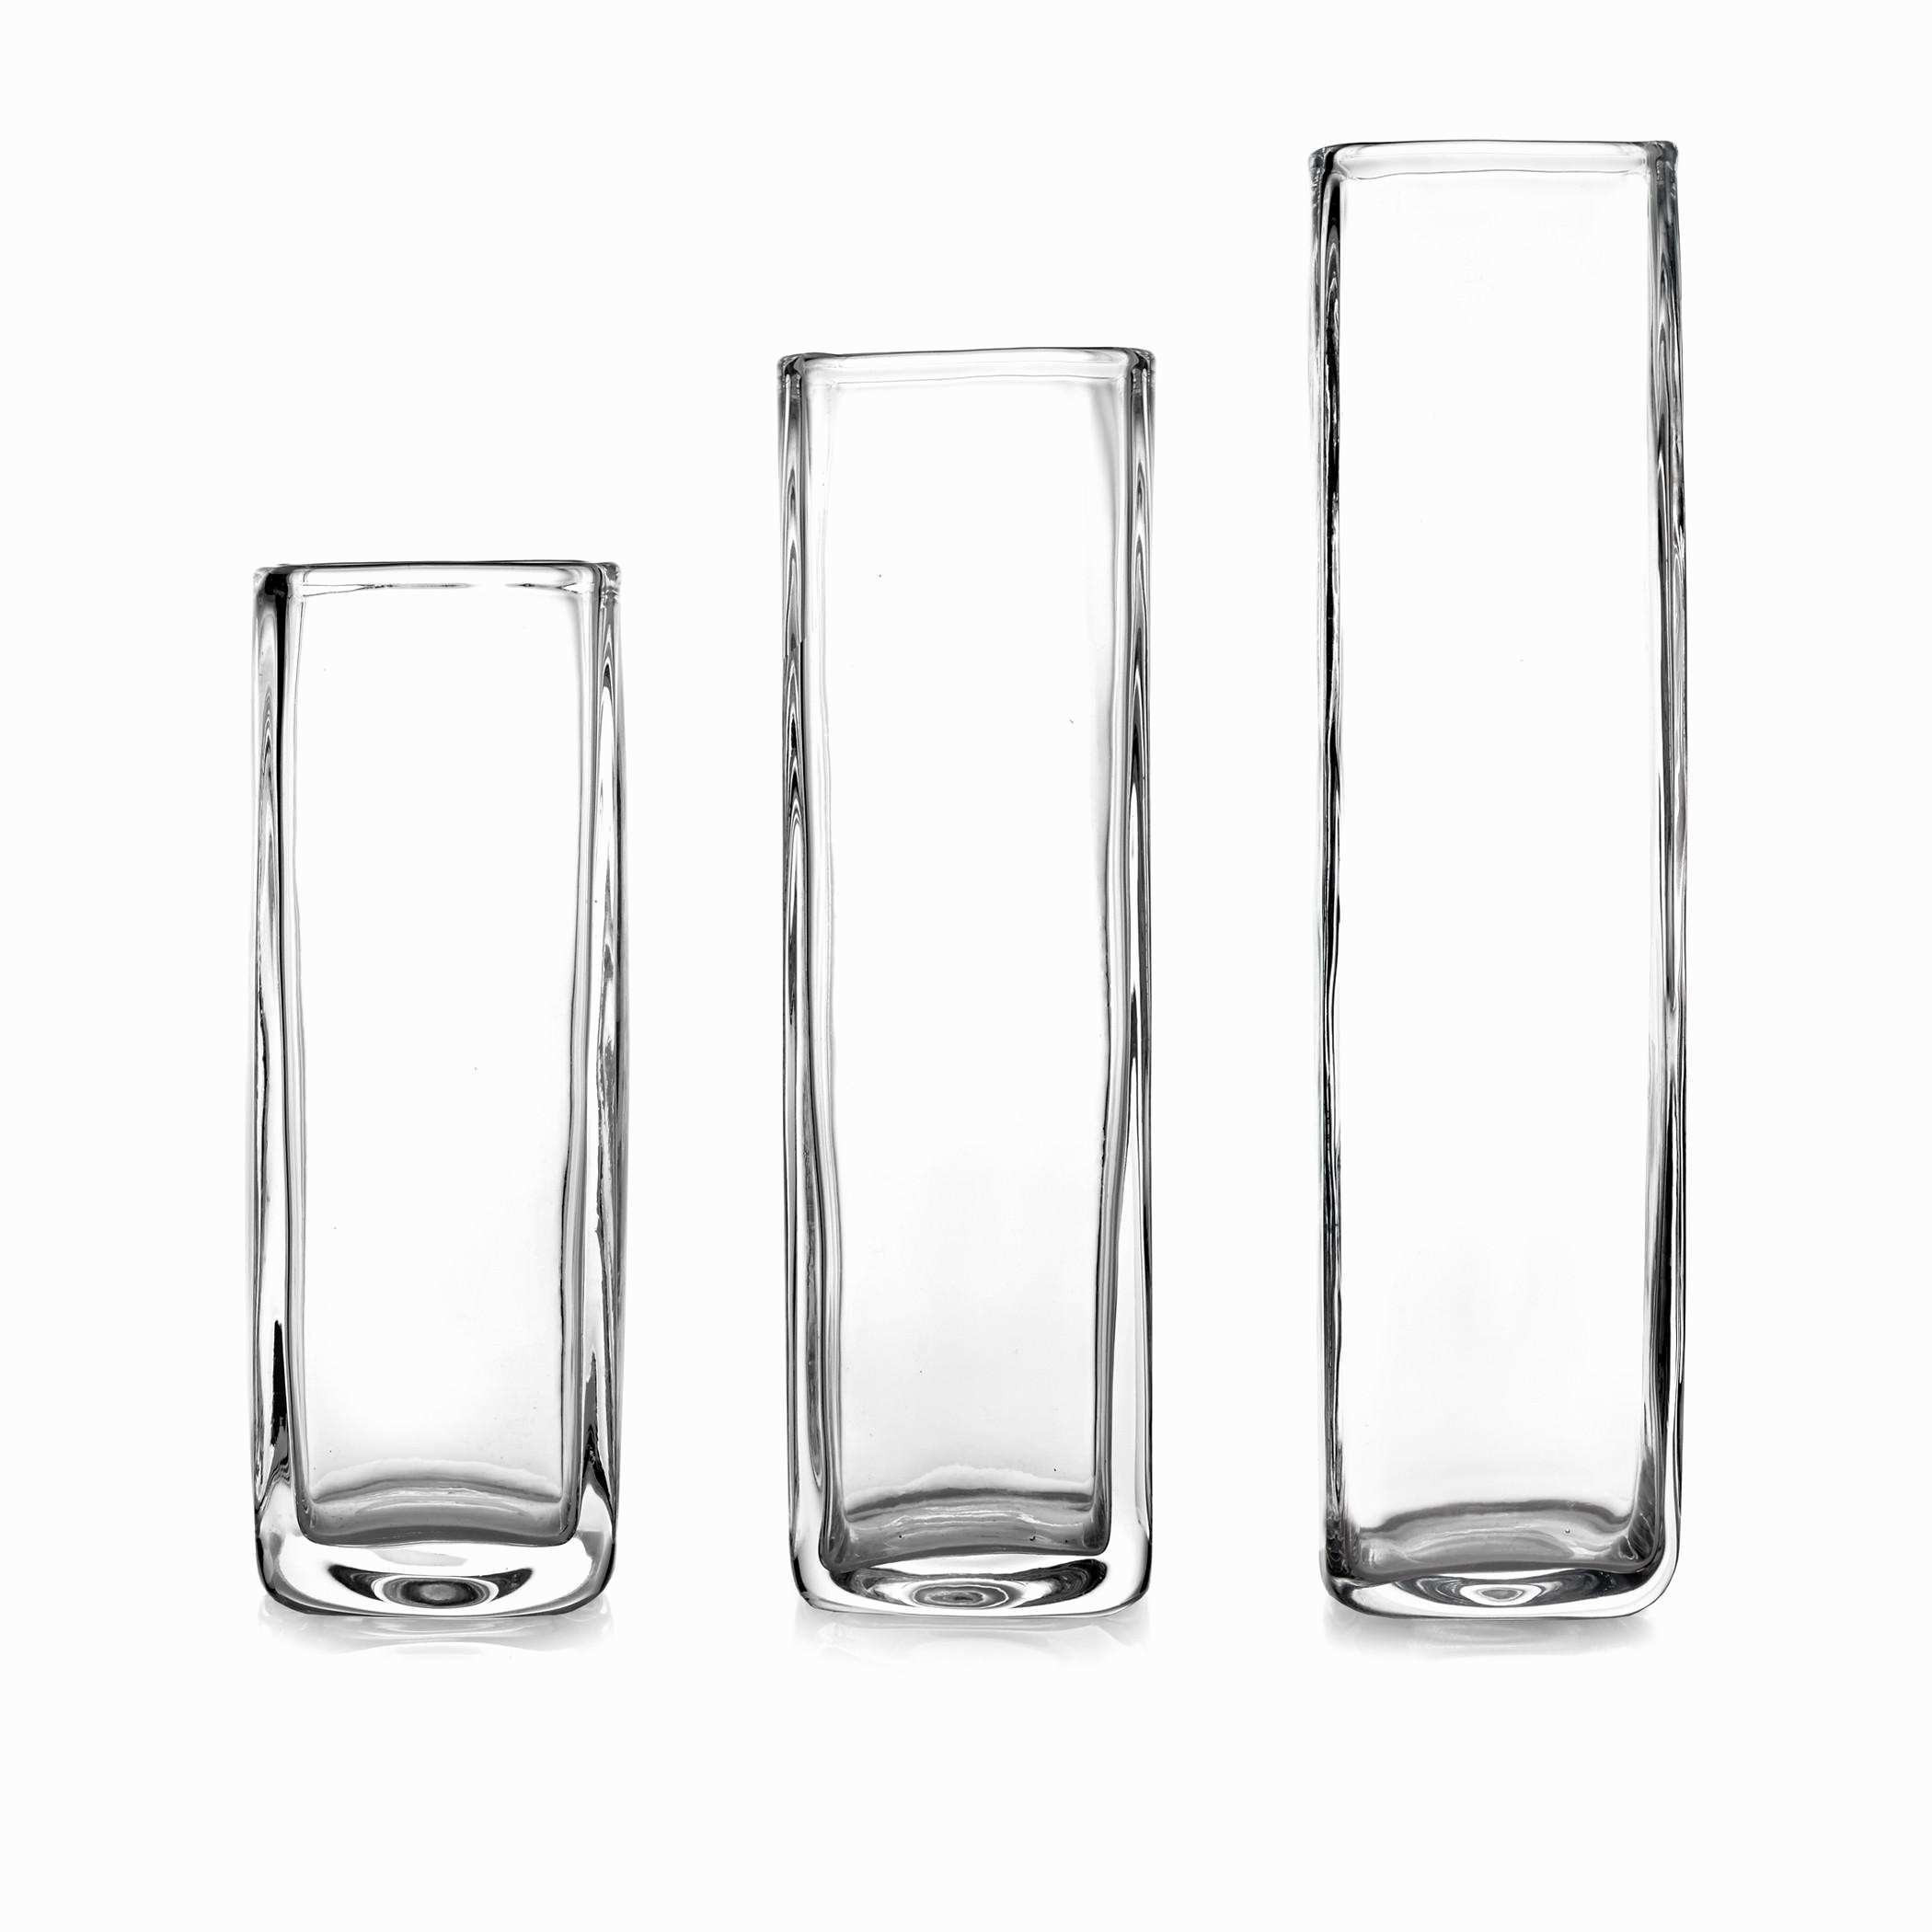 13 Stylish 4 Inch Cylinder Vase 2024 free download 4 inch cylinder vase of tall black vases pics cityscape 4 x 39 5 footed clear glass cylinder intended for tall black vases gallery glass wedding centerpieces inspirational living room tall g